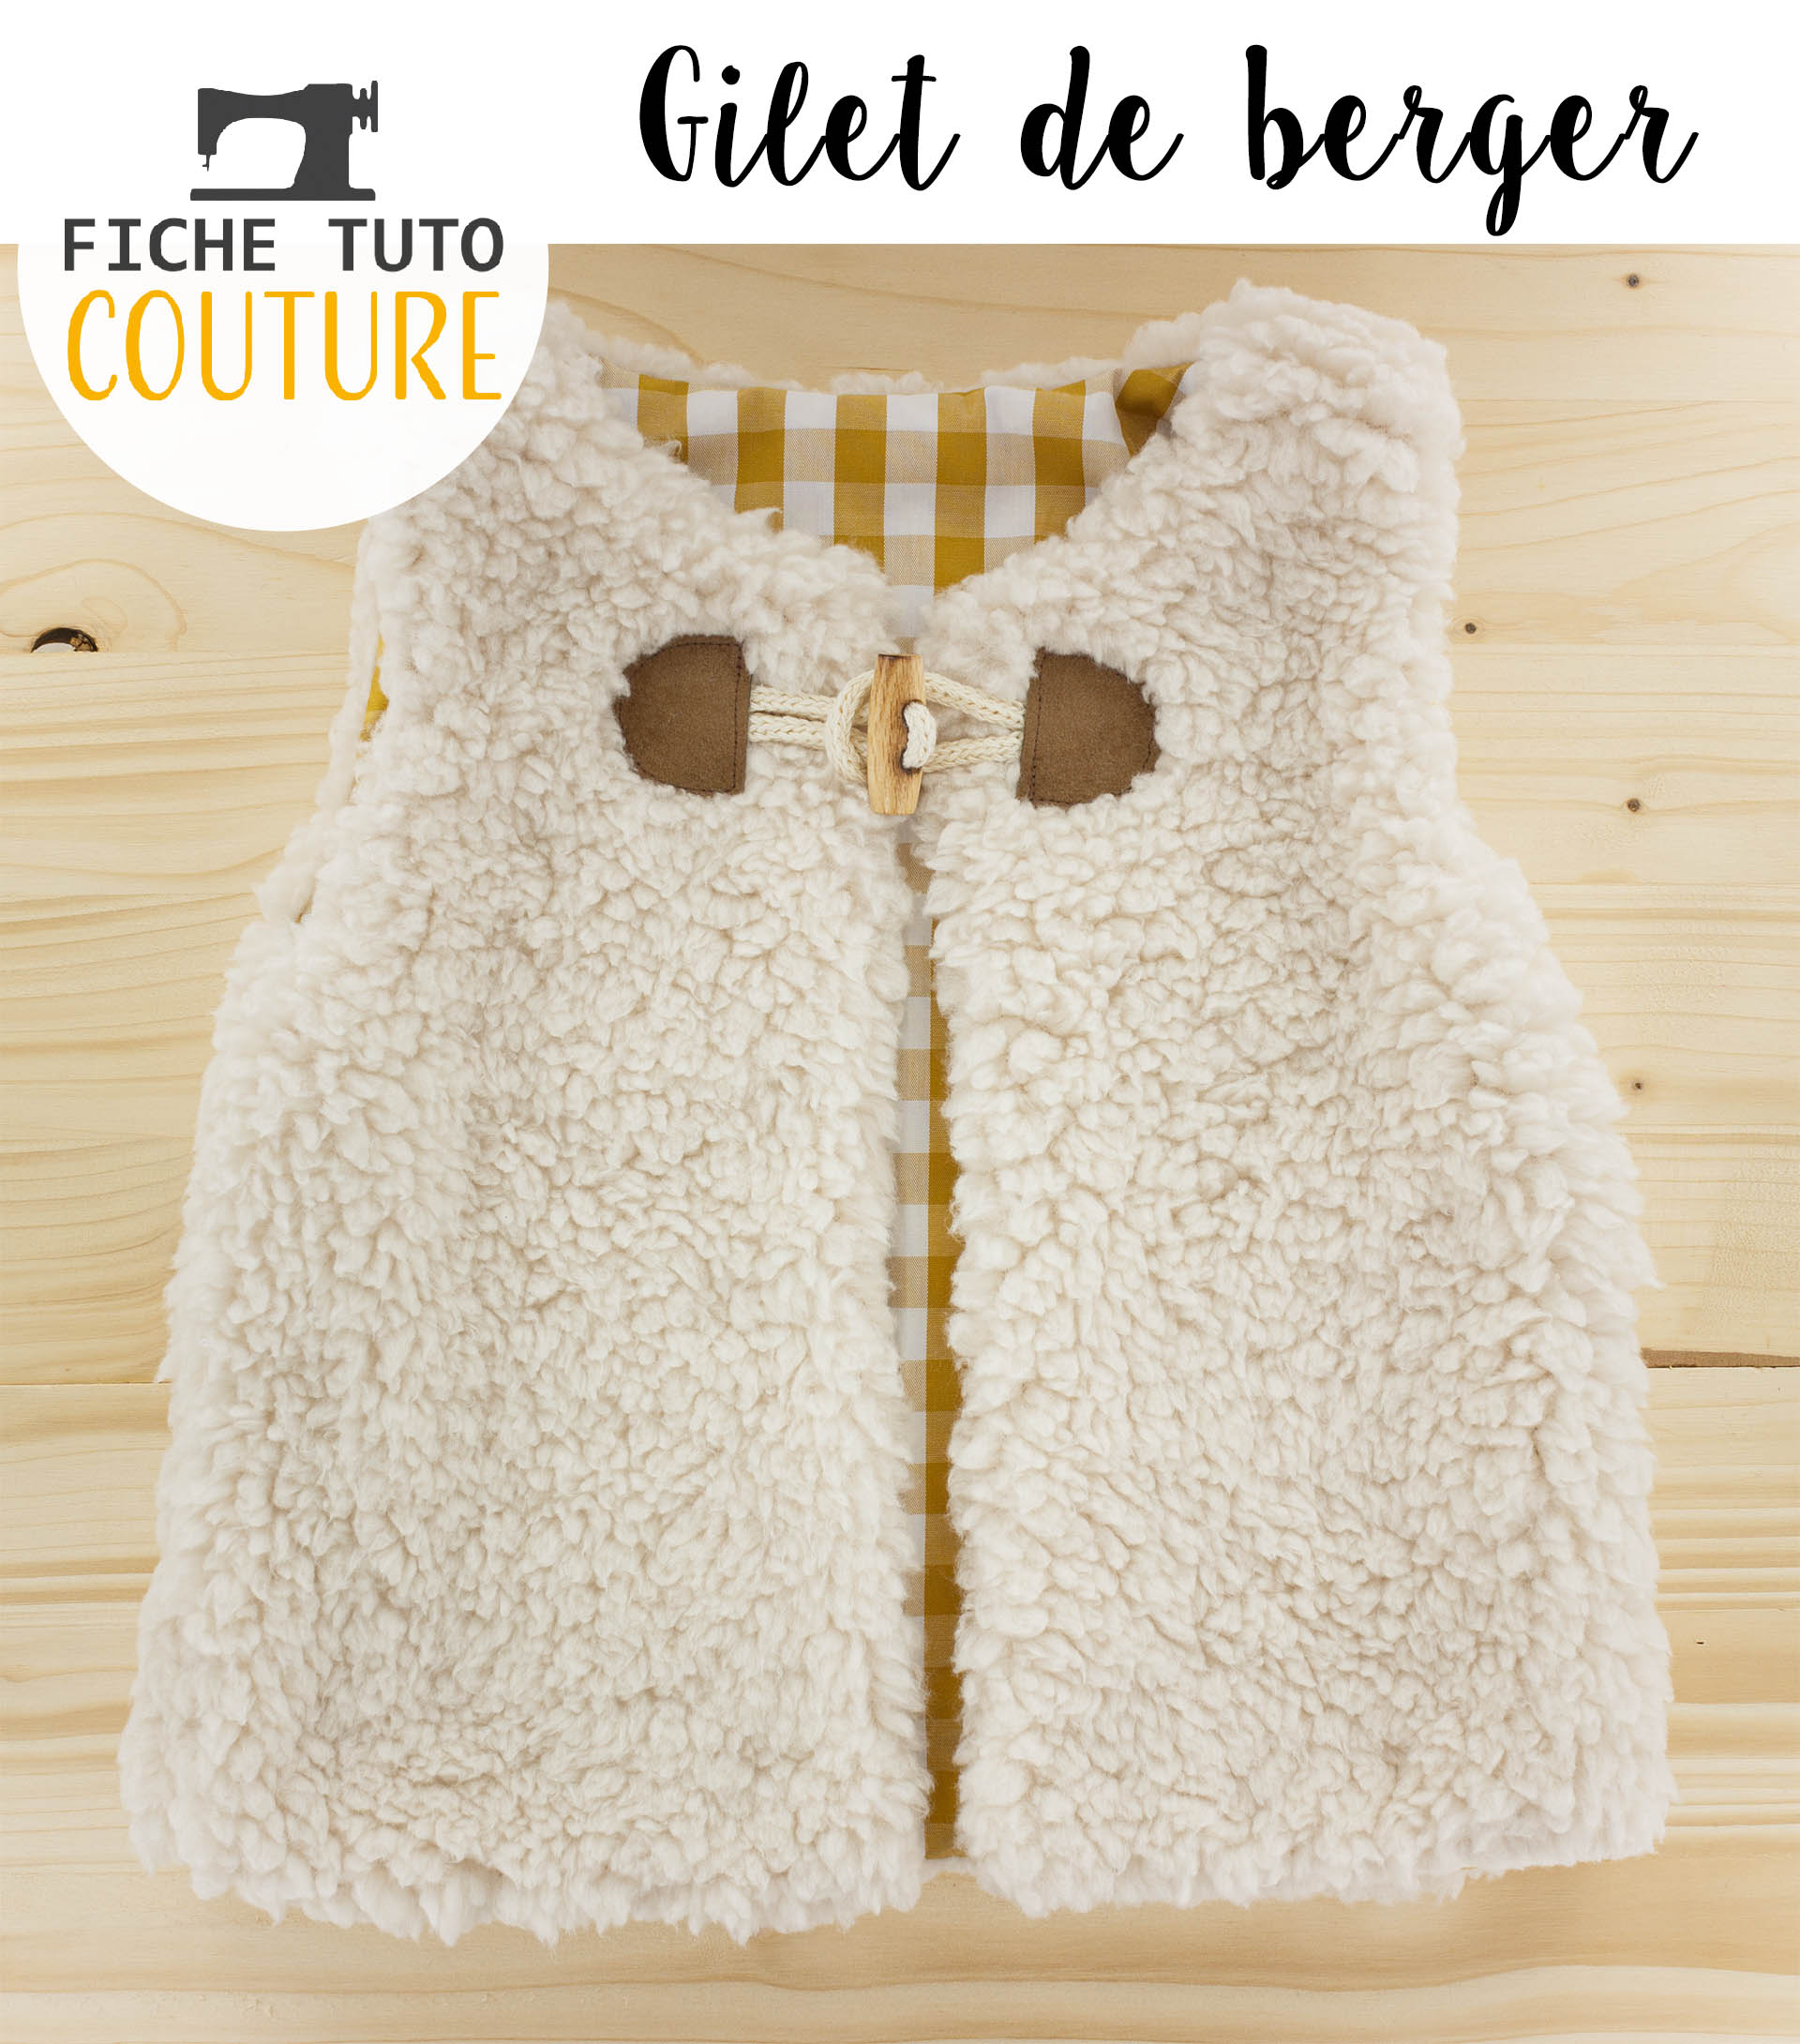 gilet berger couture